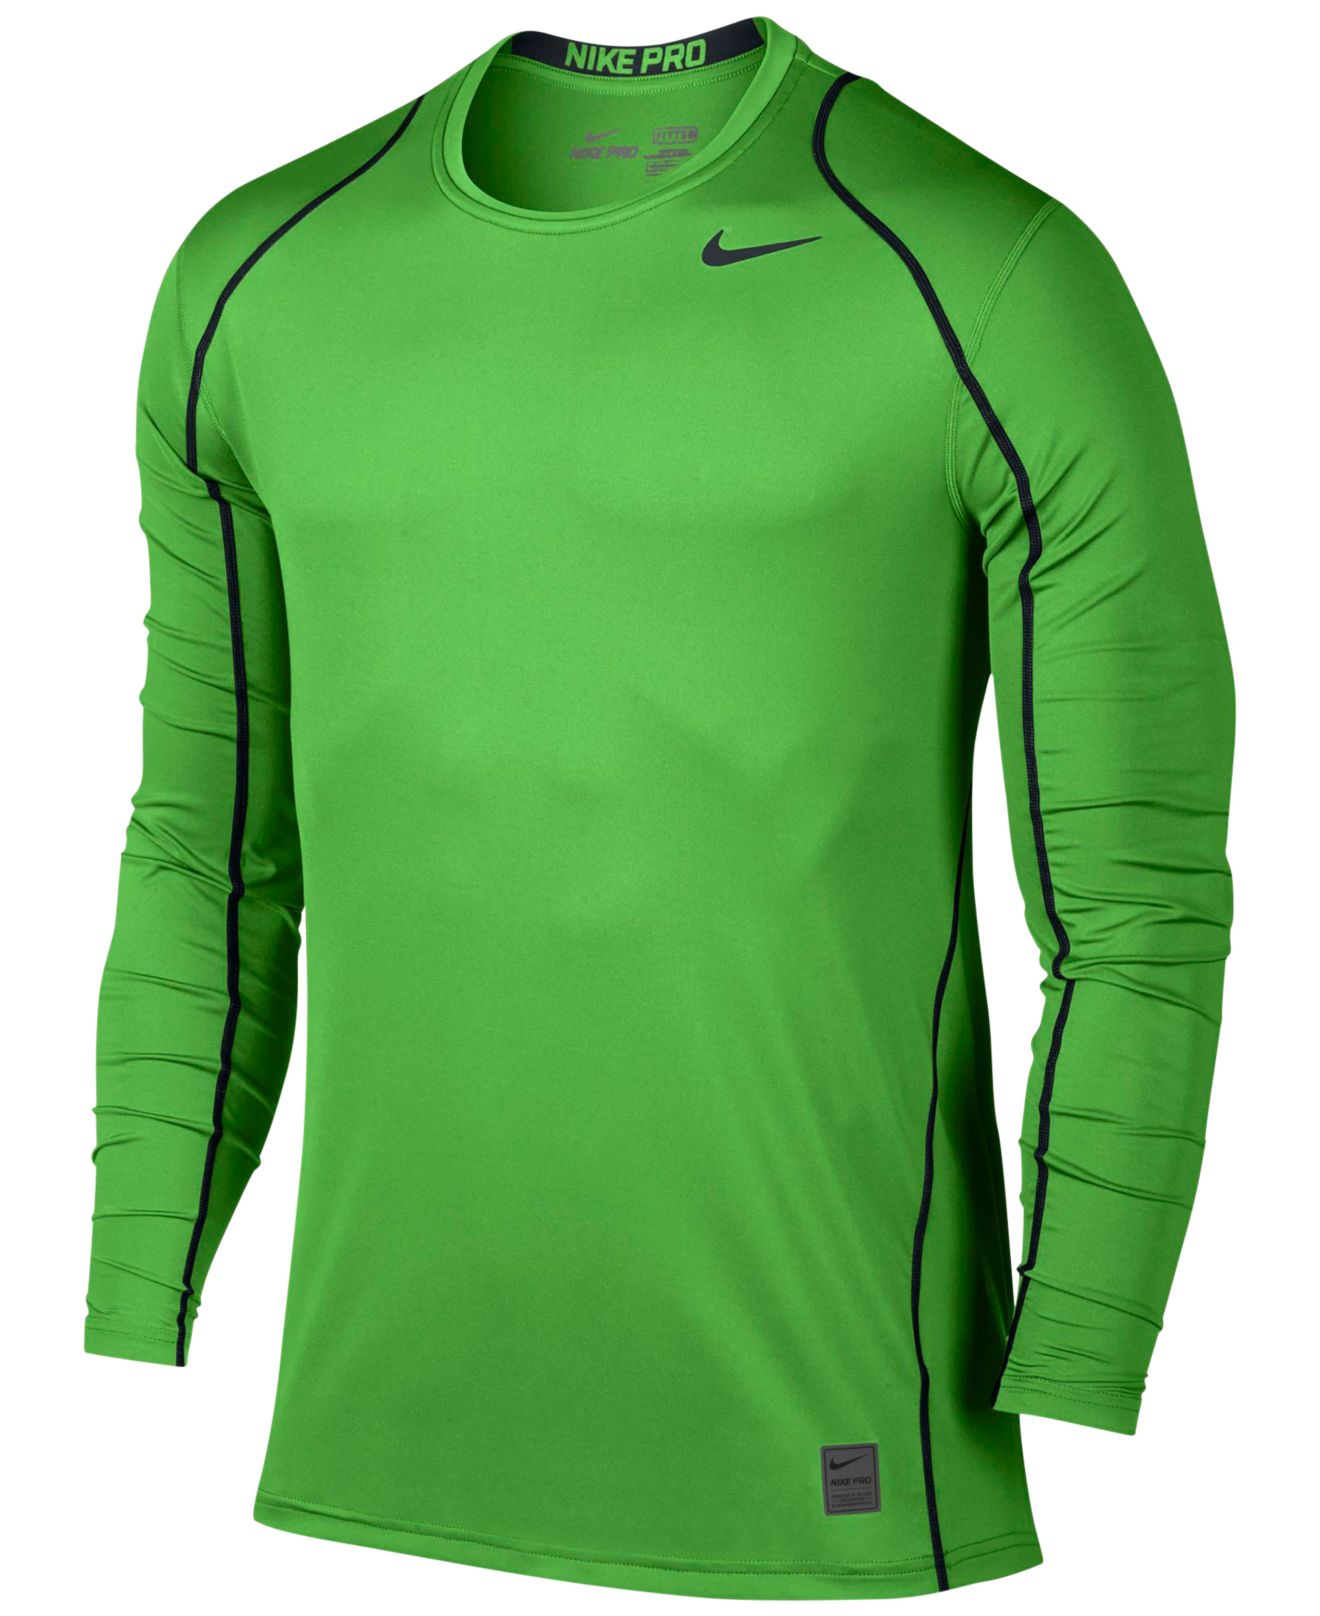 Lyst - Nike Men's Pro Cool Dri-fit Fitted Long-sleeve Shirt in Green ...